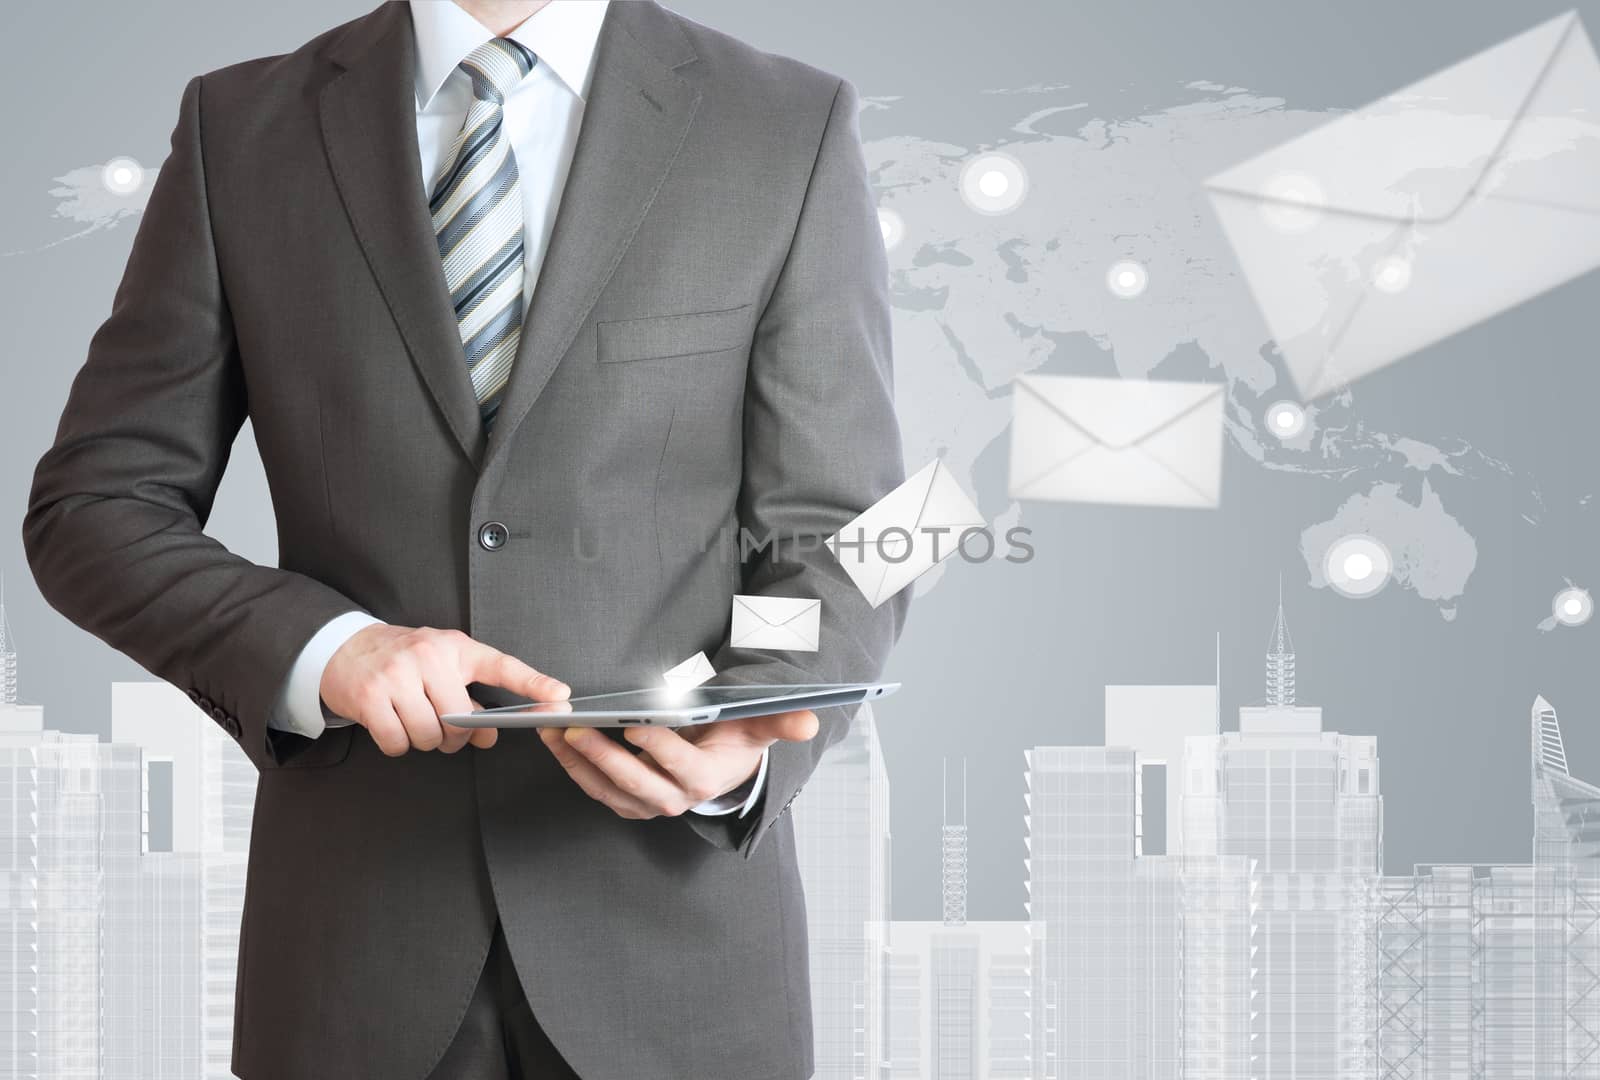 Man in suit holding tablet pc. Envelopes are emitted from the screen tablet. The concept of mailing